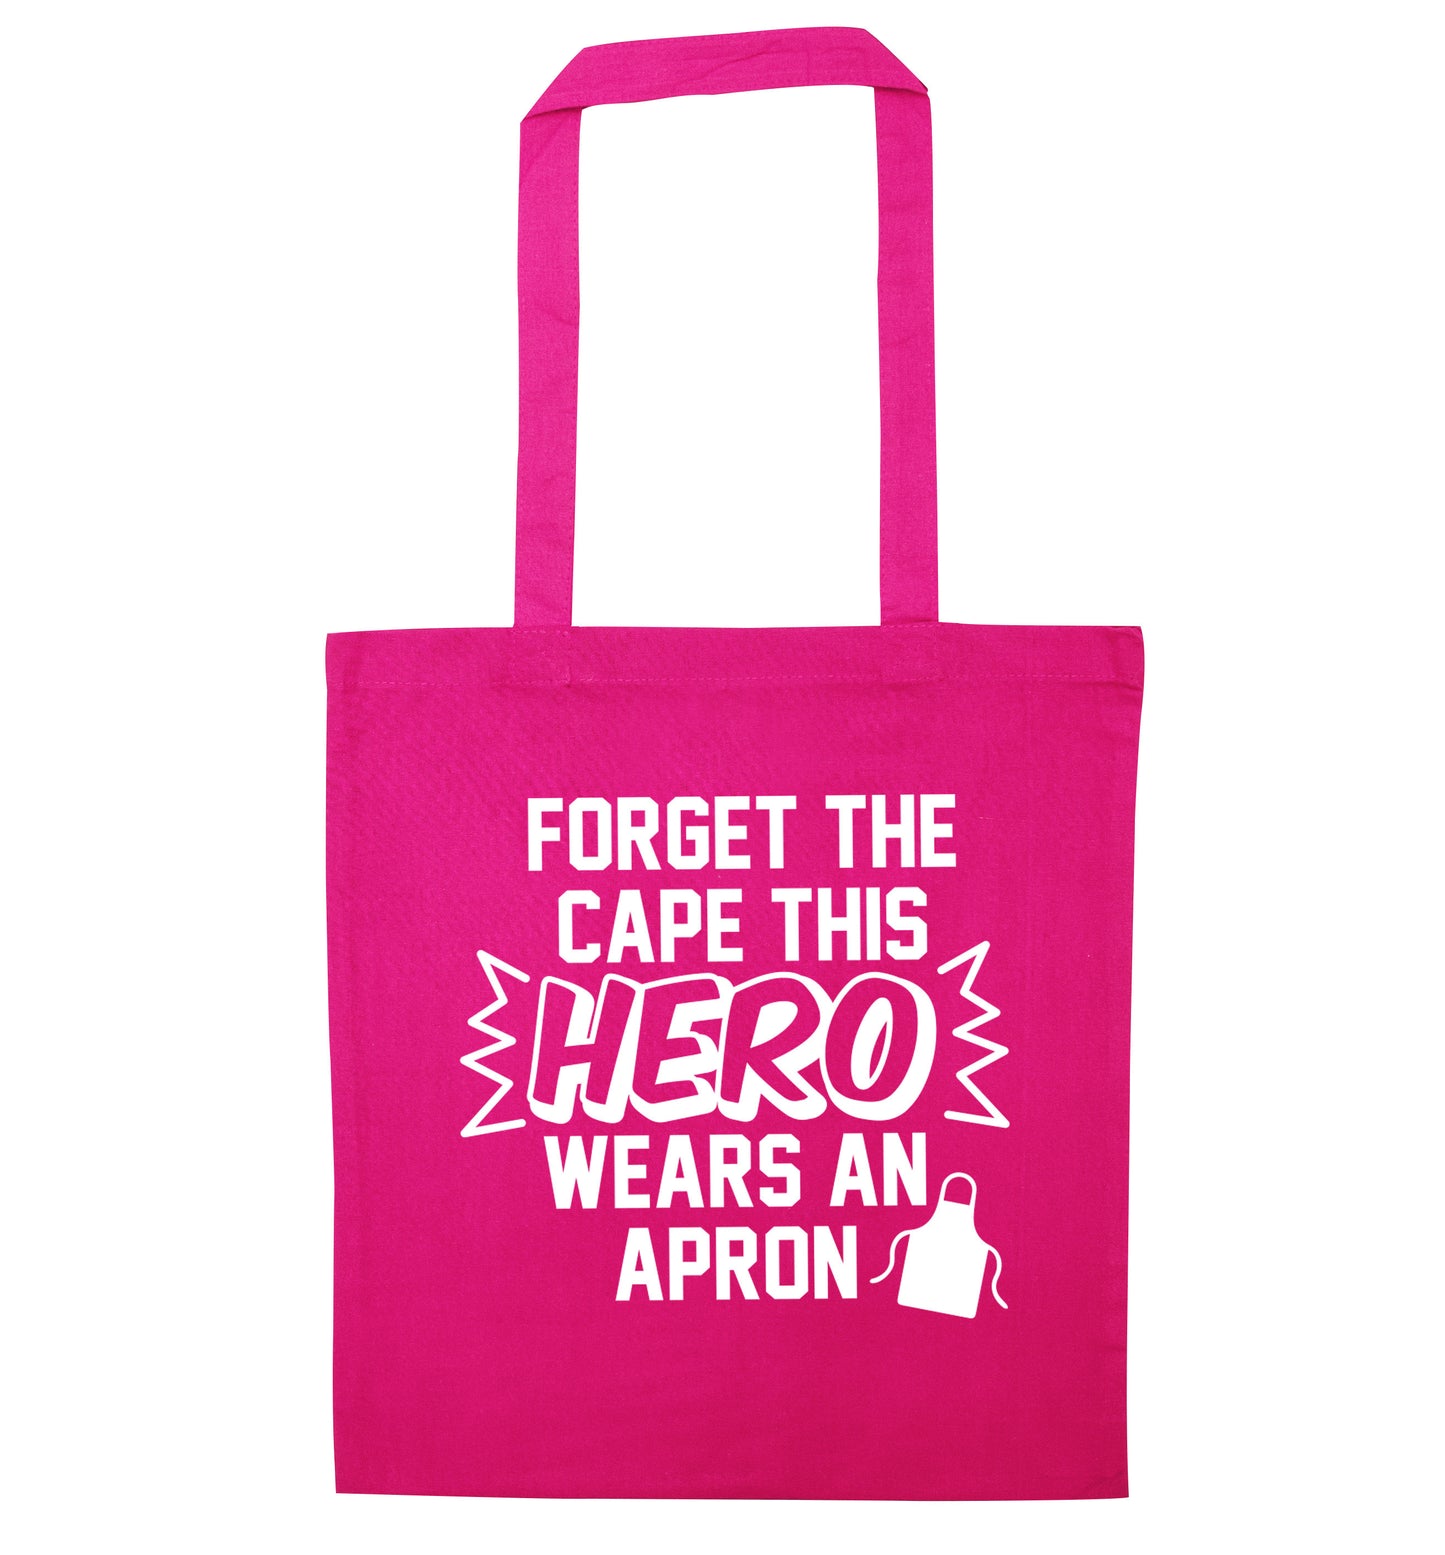 Forget the cape this hero wears an apron pink tote bag